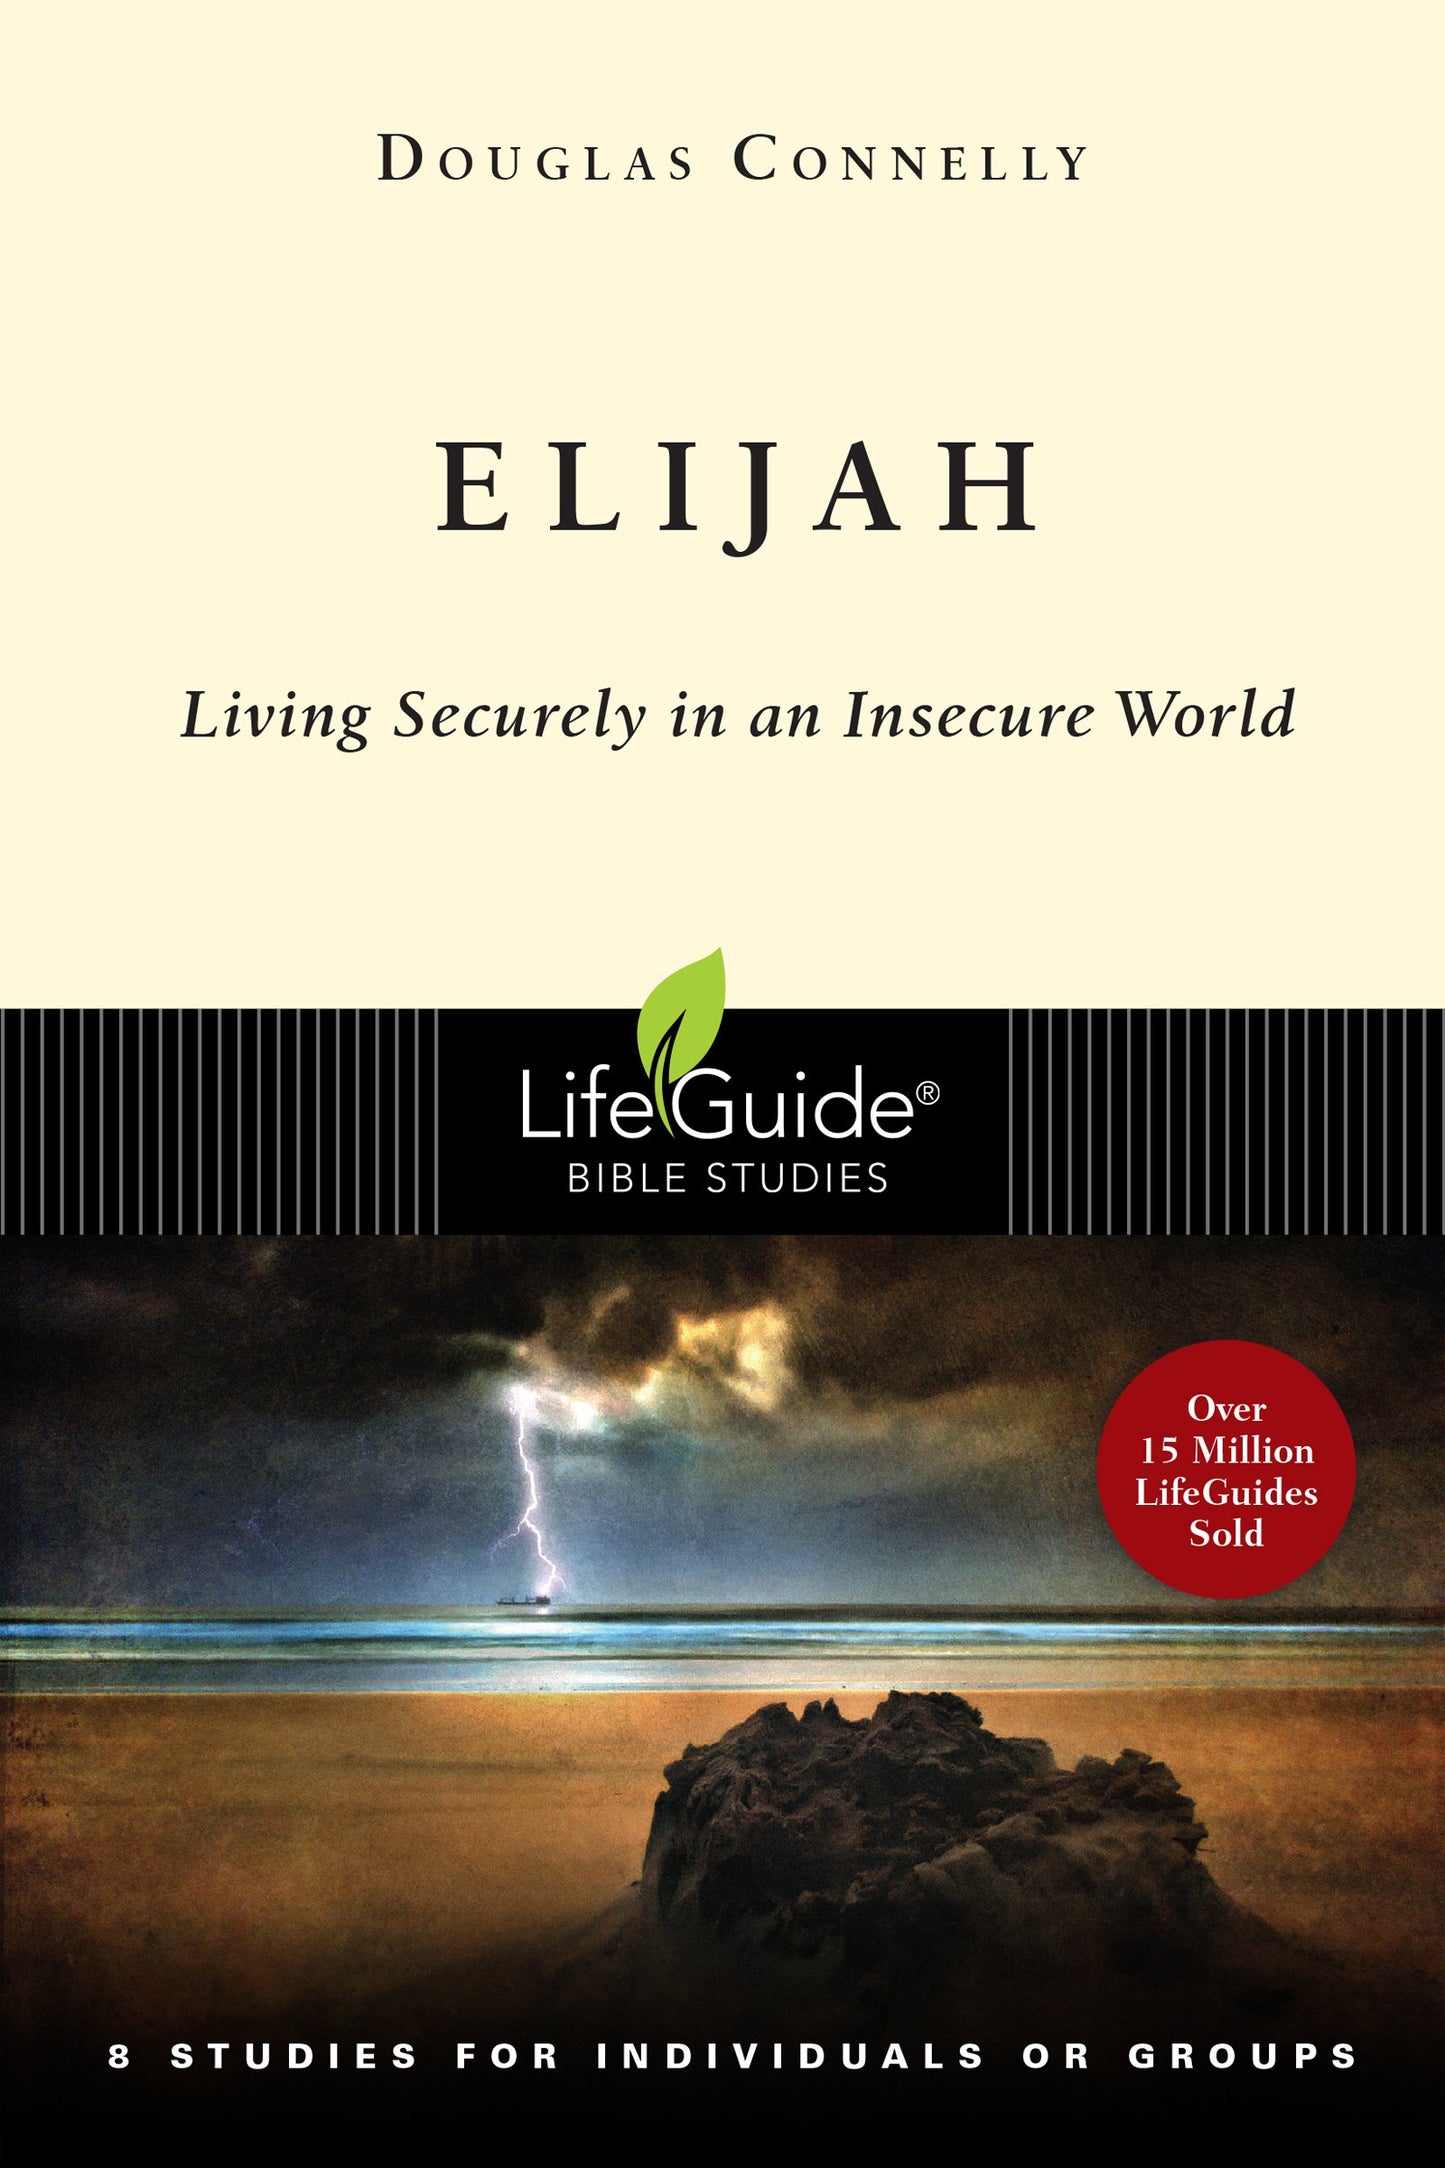 Elijah: Living Securely in an Insecure World (LifeGuide Bible Studies)